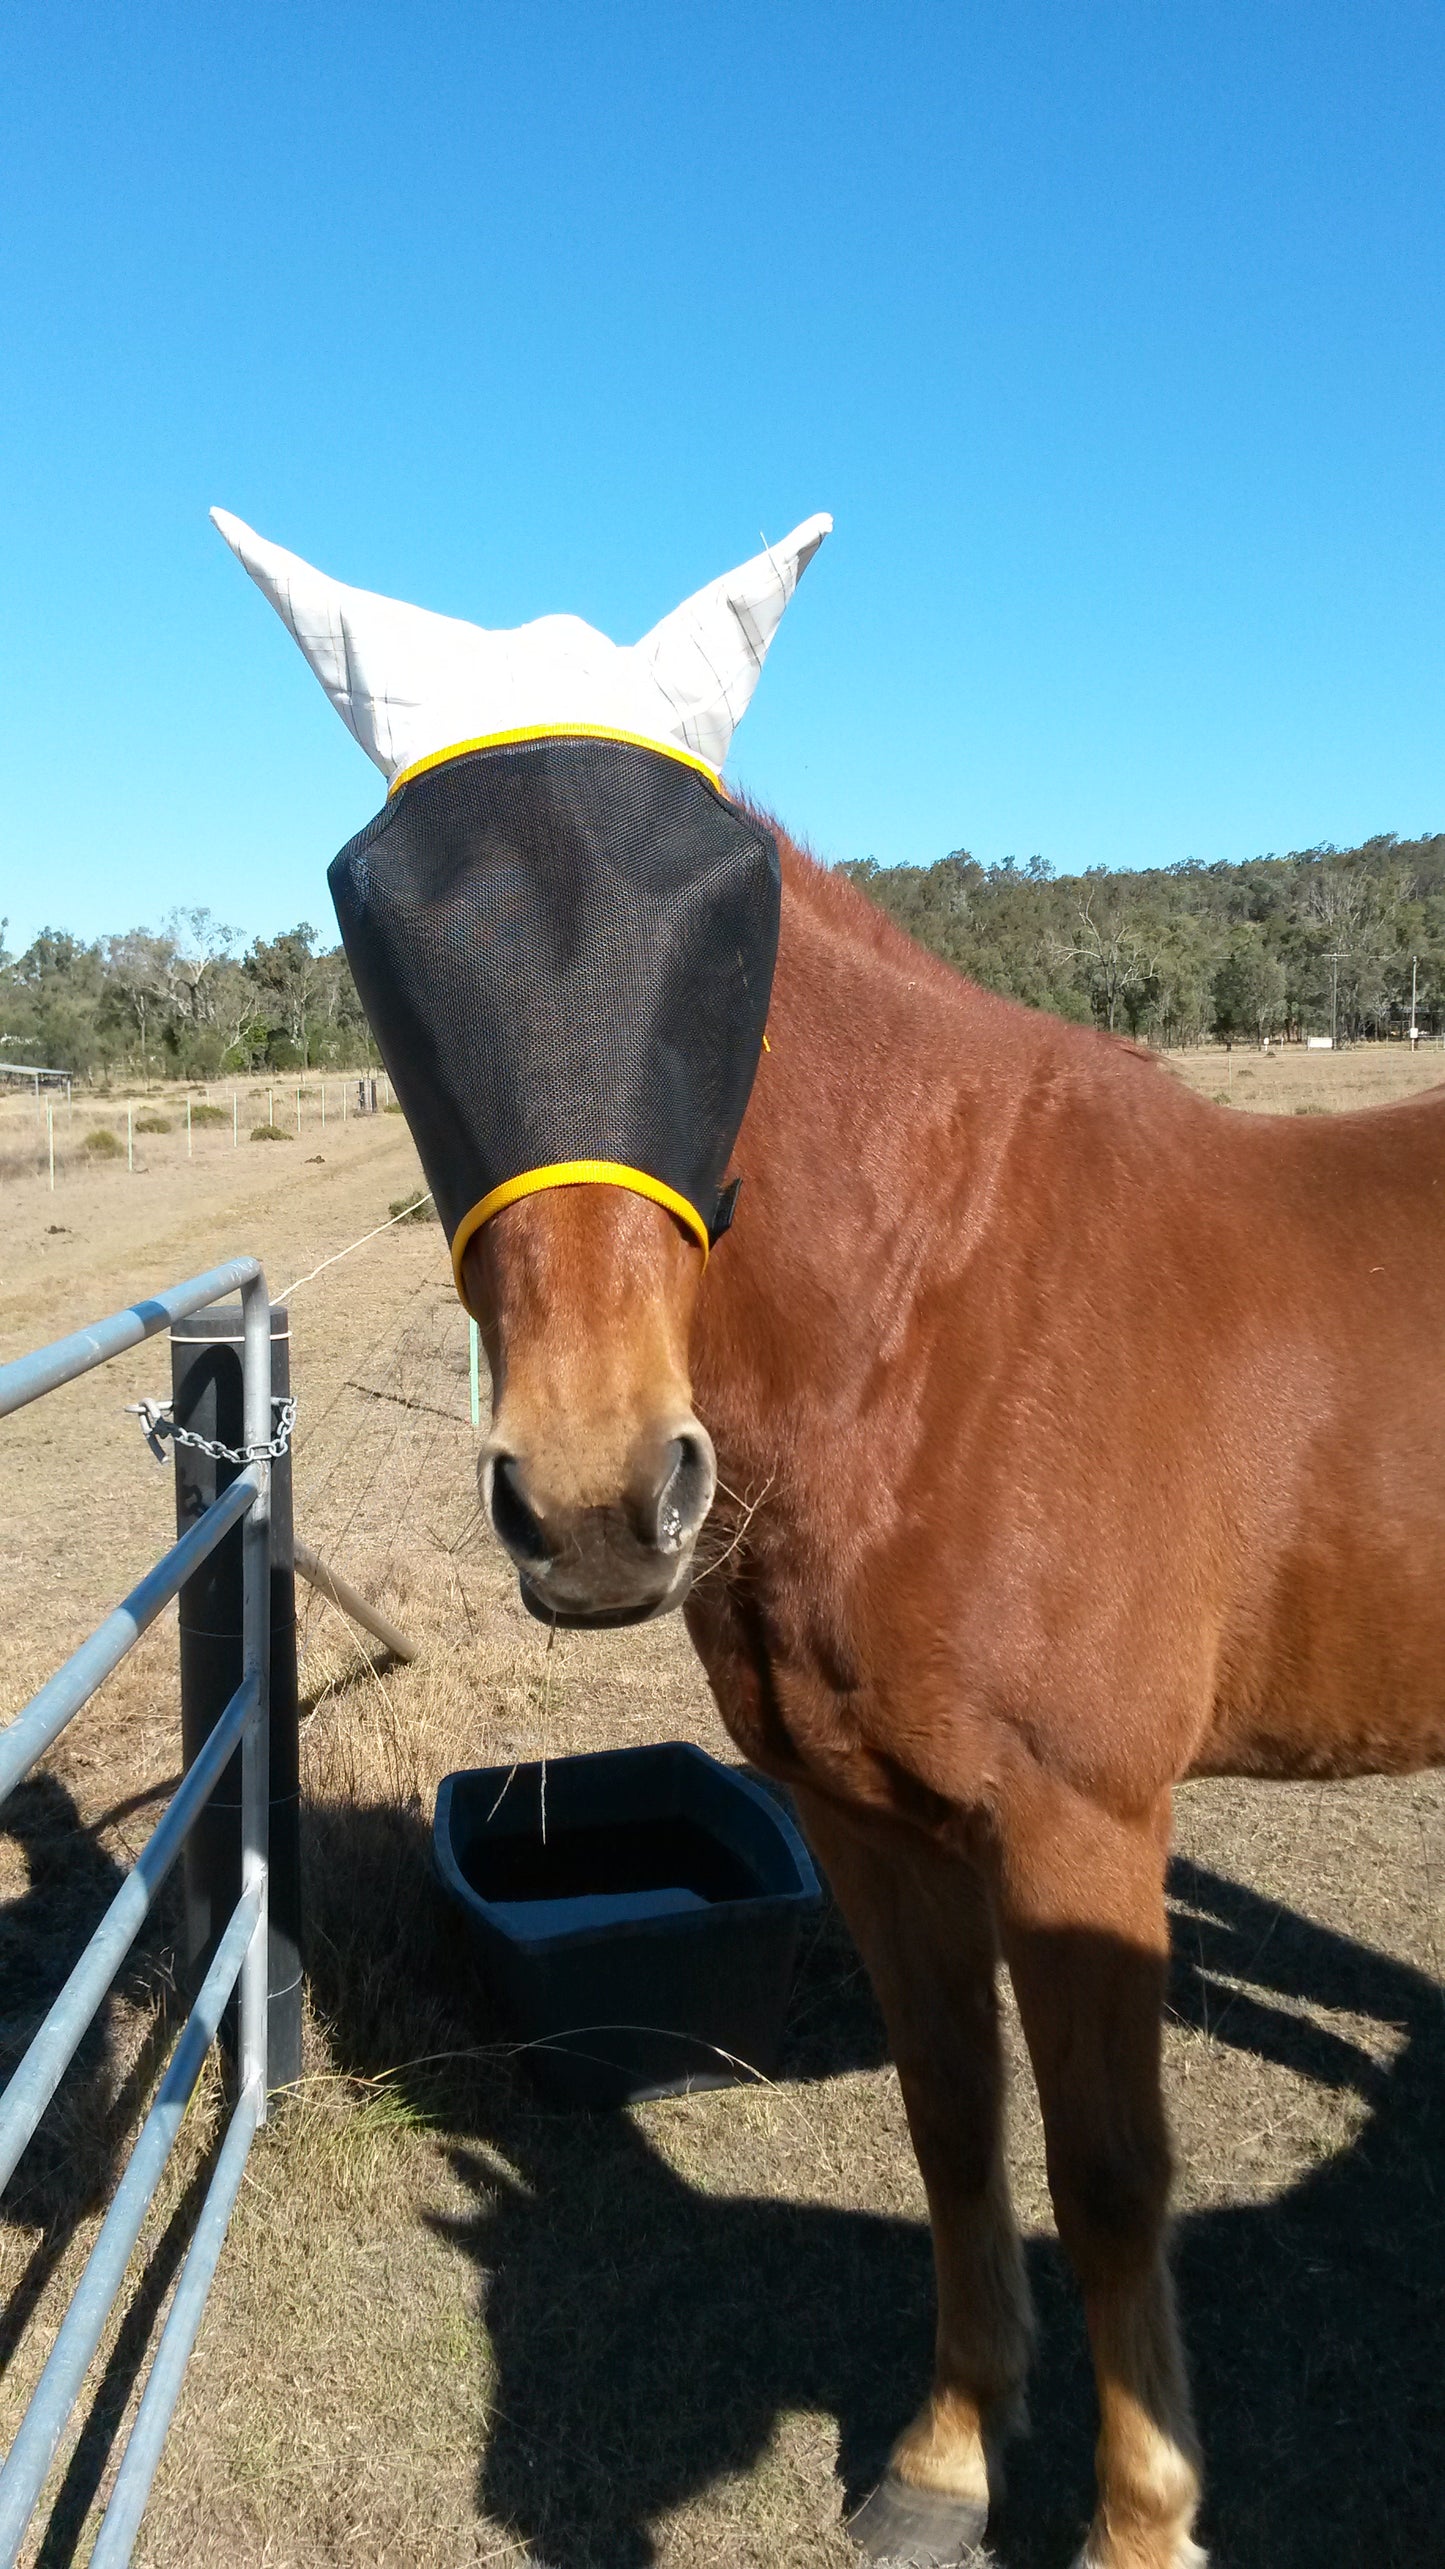 N’hay Fly Mask with Bonnet and Nose piece